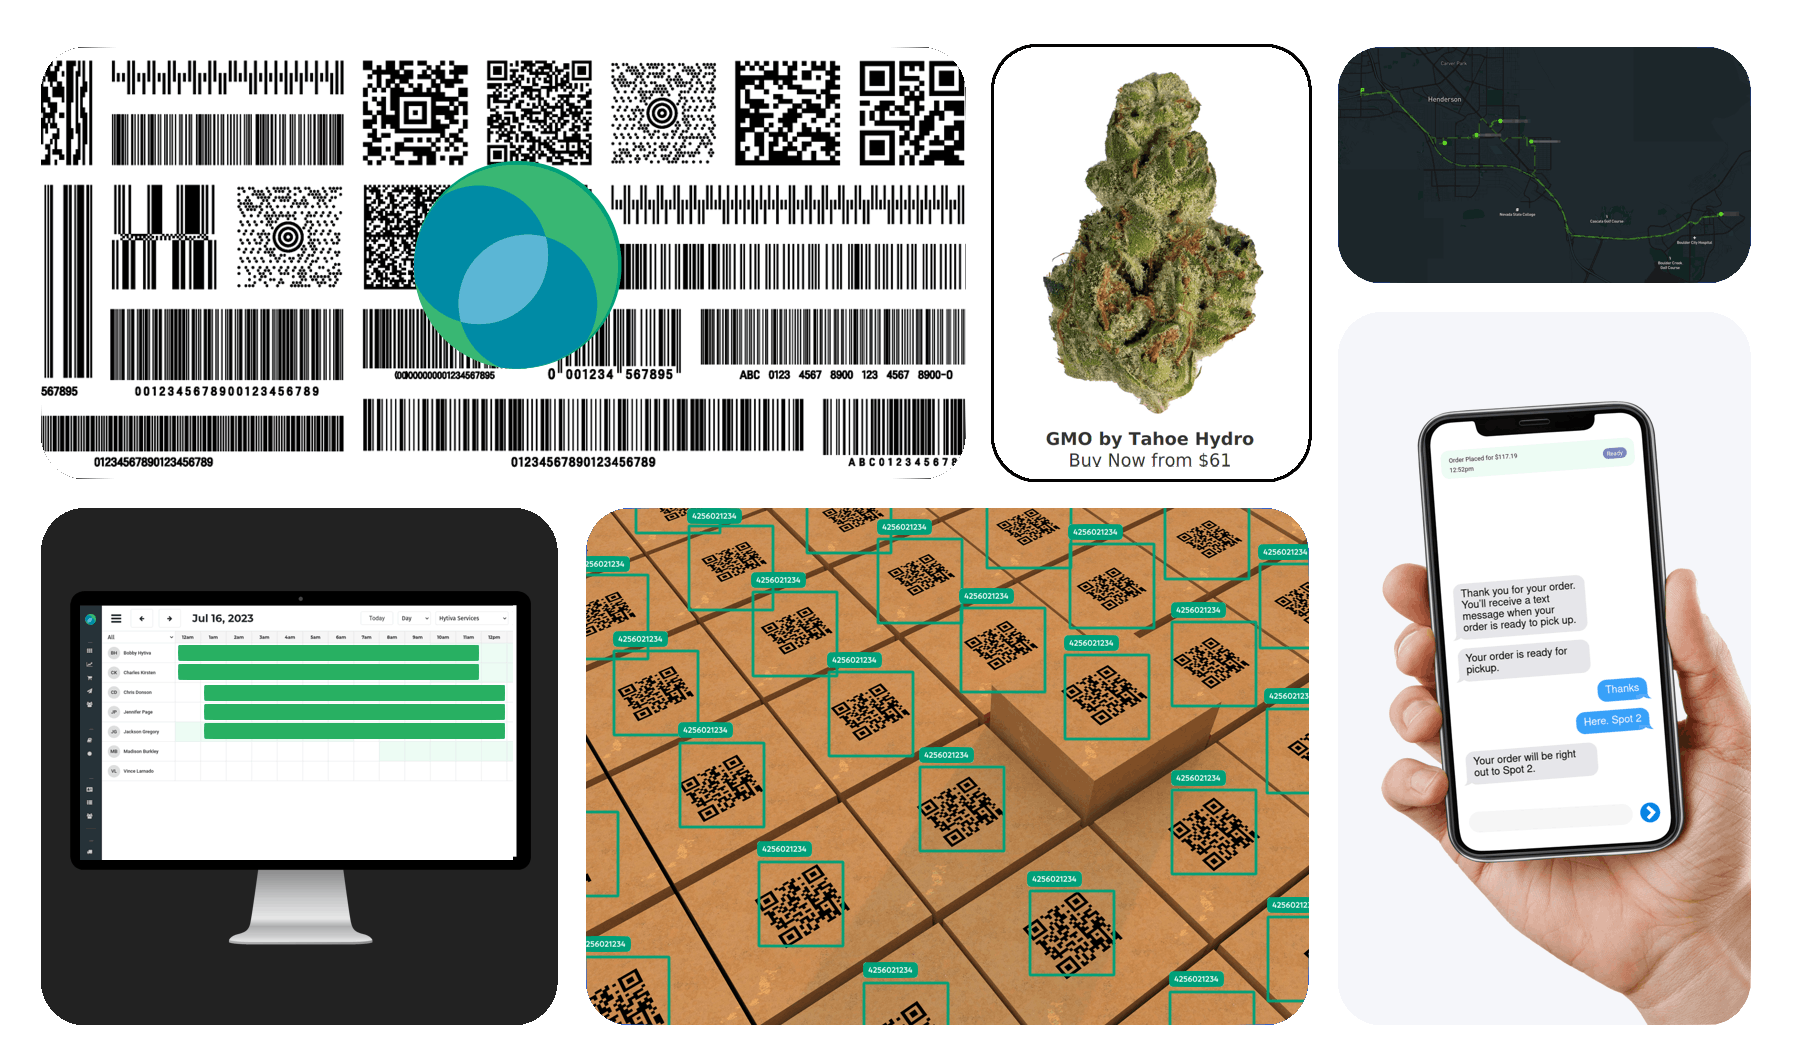 Hytiva® at the Forefront of AI in Cannabis